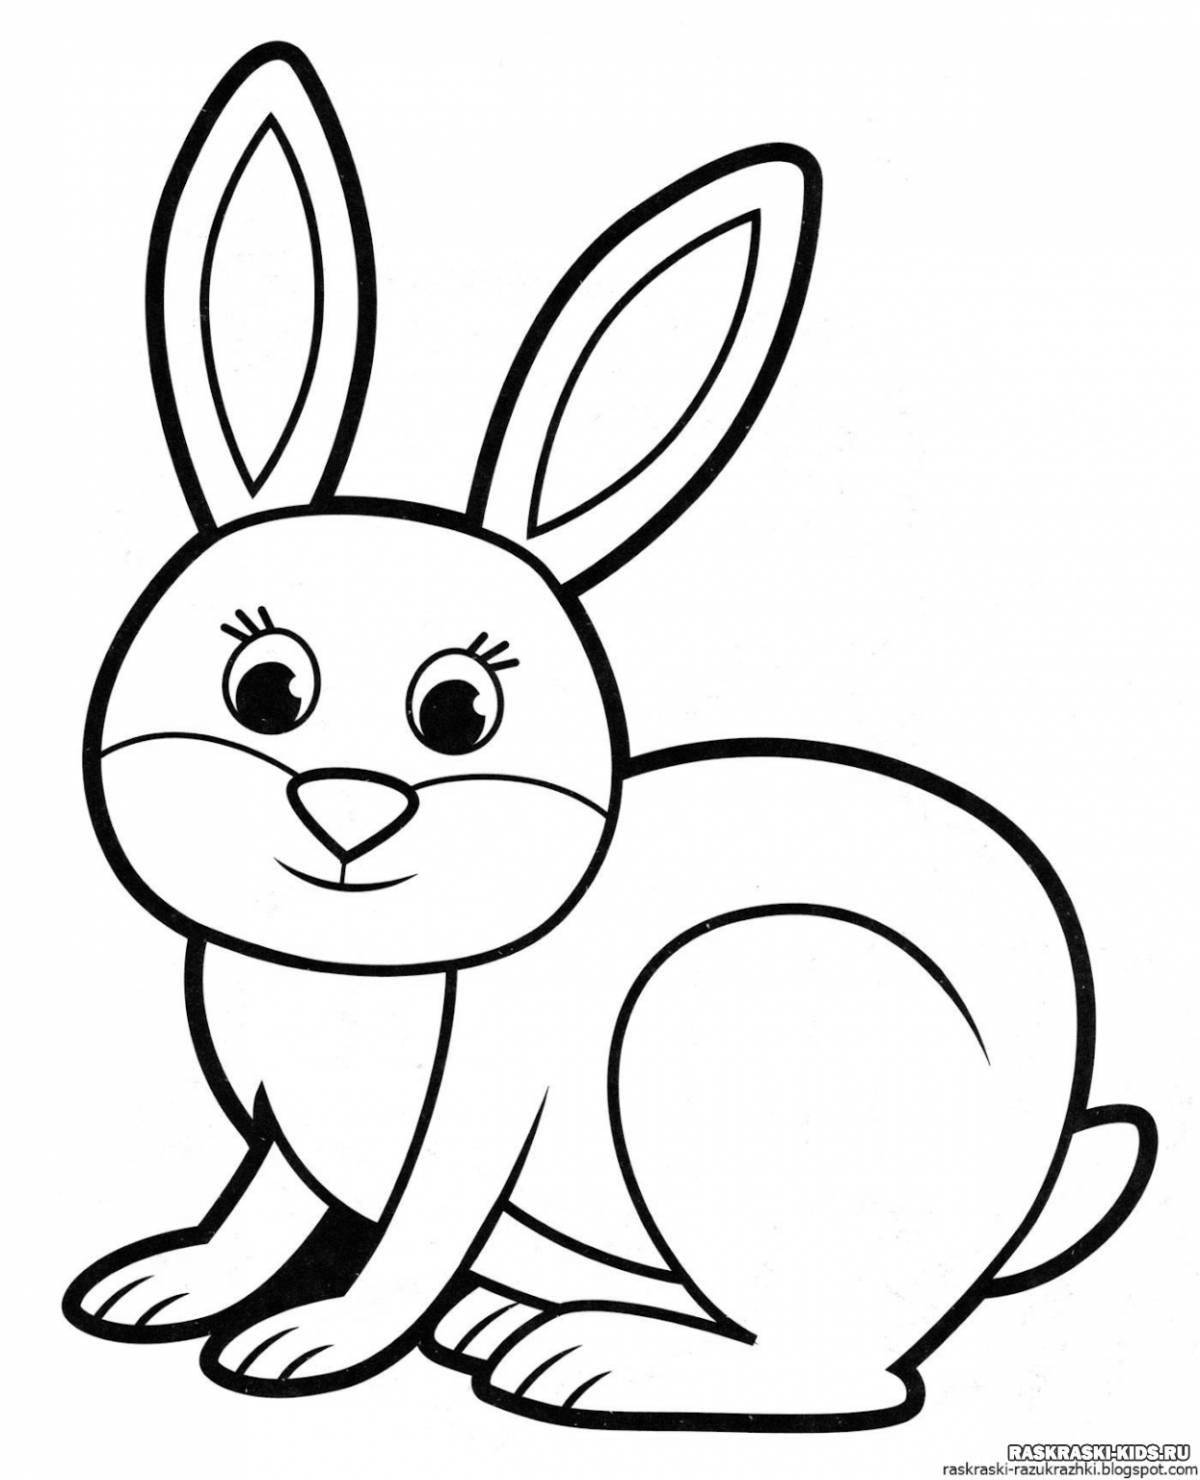 Coloring book shining rabbit for kids